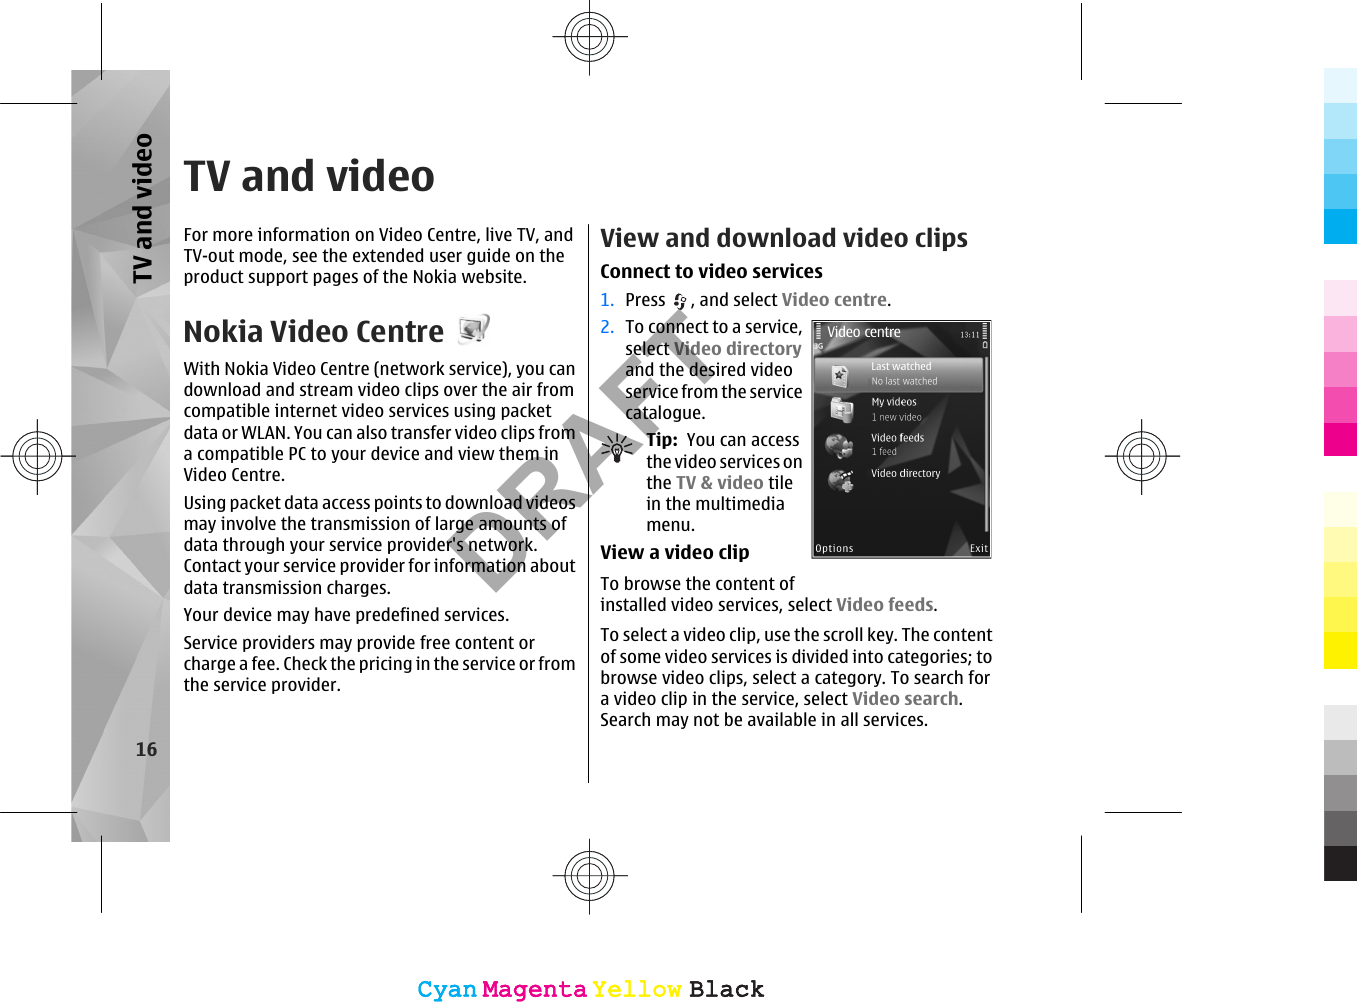 TV and videoFor more information on Video Centre, live TV, andTV-out mode, see the extended user guide on theproduct support pages of the Nokia website.Nokia Video CentreWith Nokia Video Centre (network service), you candownload and stream video clips over the air fromcompatible internet video services using packetdata or WLAN. You can also transfer video clips froma compatible PC to your device and view them inVideo Centre.Using packet data access points to download videosmay involve the transmission of large amounts ofdata through your service provider&apos;s network.Contact your service provider for information aboutdata transmission charges.Your device may have predefined services.Service providers may provide free content orcharge a fee. Check the pricing in the service or fromthe service provider.View and download video clipsConnect to video services1. Press  , and select Video centre.2. To connect to a service,select Video directoryand the desired videoservice from the servicecatalogue.Tip:  You can accessthe video services onthe TV &amp; video tilein the multimediamenu.View a video clipTo browse the content ofinstalled video services, select Video feeds.To select a video clip, use the scroll key. The contentof some video services is divided into categories; tobrowse video clips, select a category. To search fora video clip in the service, select Video search.Search may not be available in all services.16TV and videoCyanCyanMagentaMagentaYellowYellowBlackBlackCyanCyanMagentaMagentaYellowYellowBlackBlackDRAFT